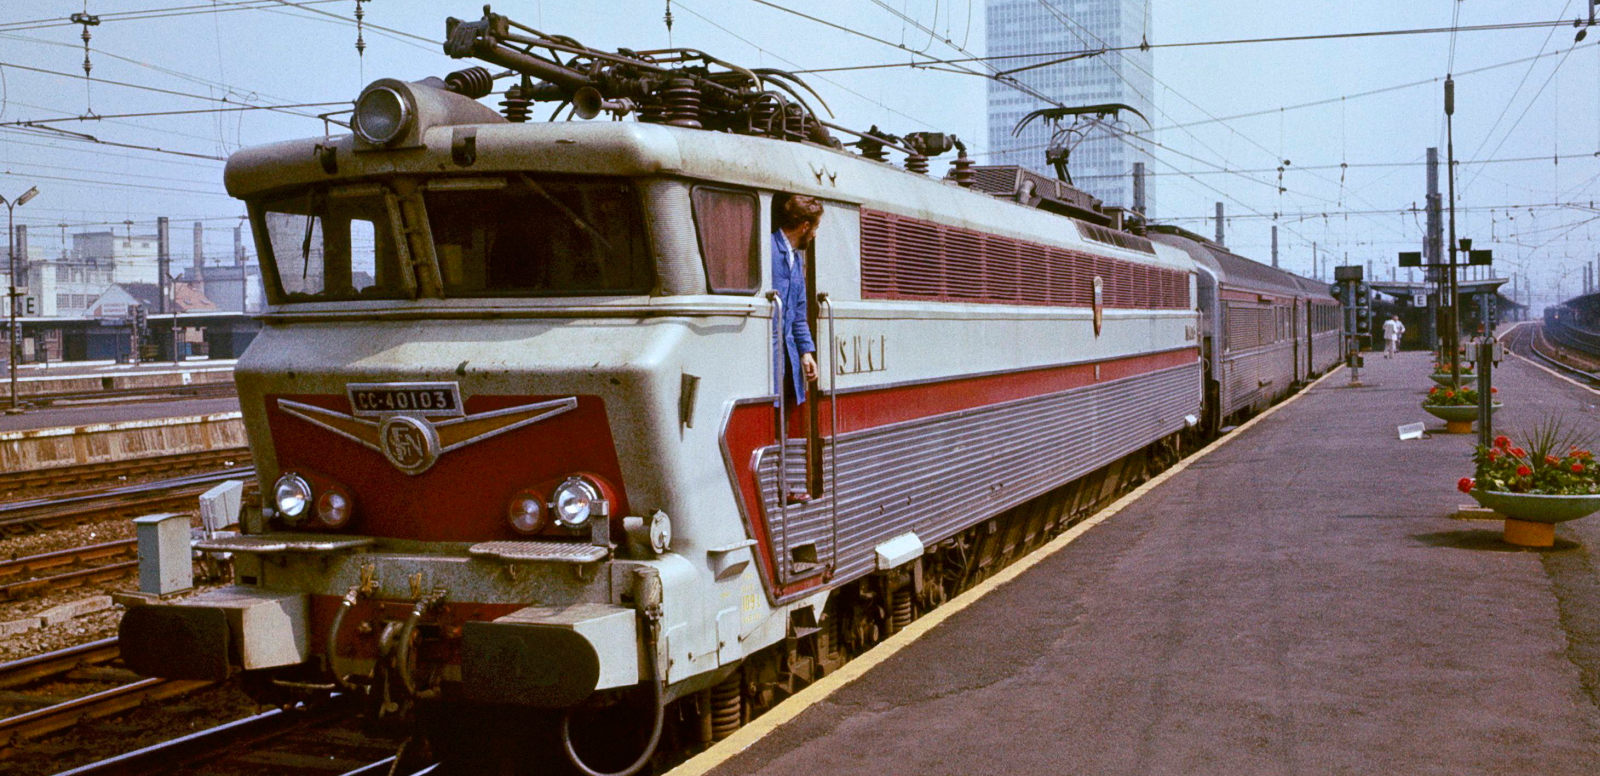 CC 40103 with the TEE “L'Oiseau Bleu” in 1979 at the Gare du Midi, Brussels